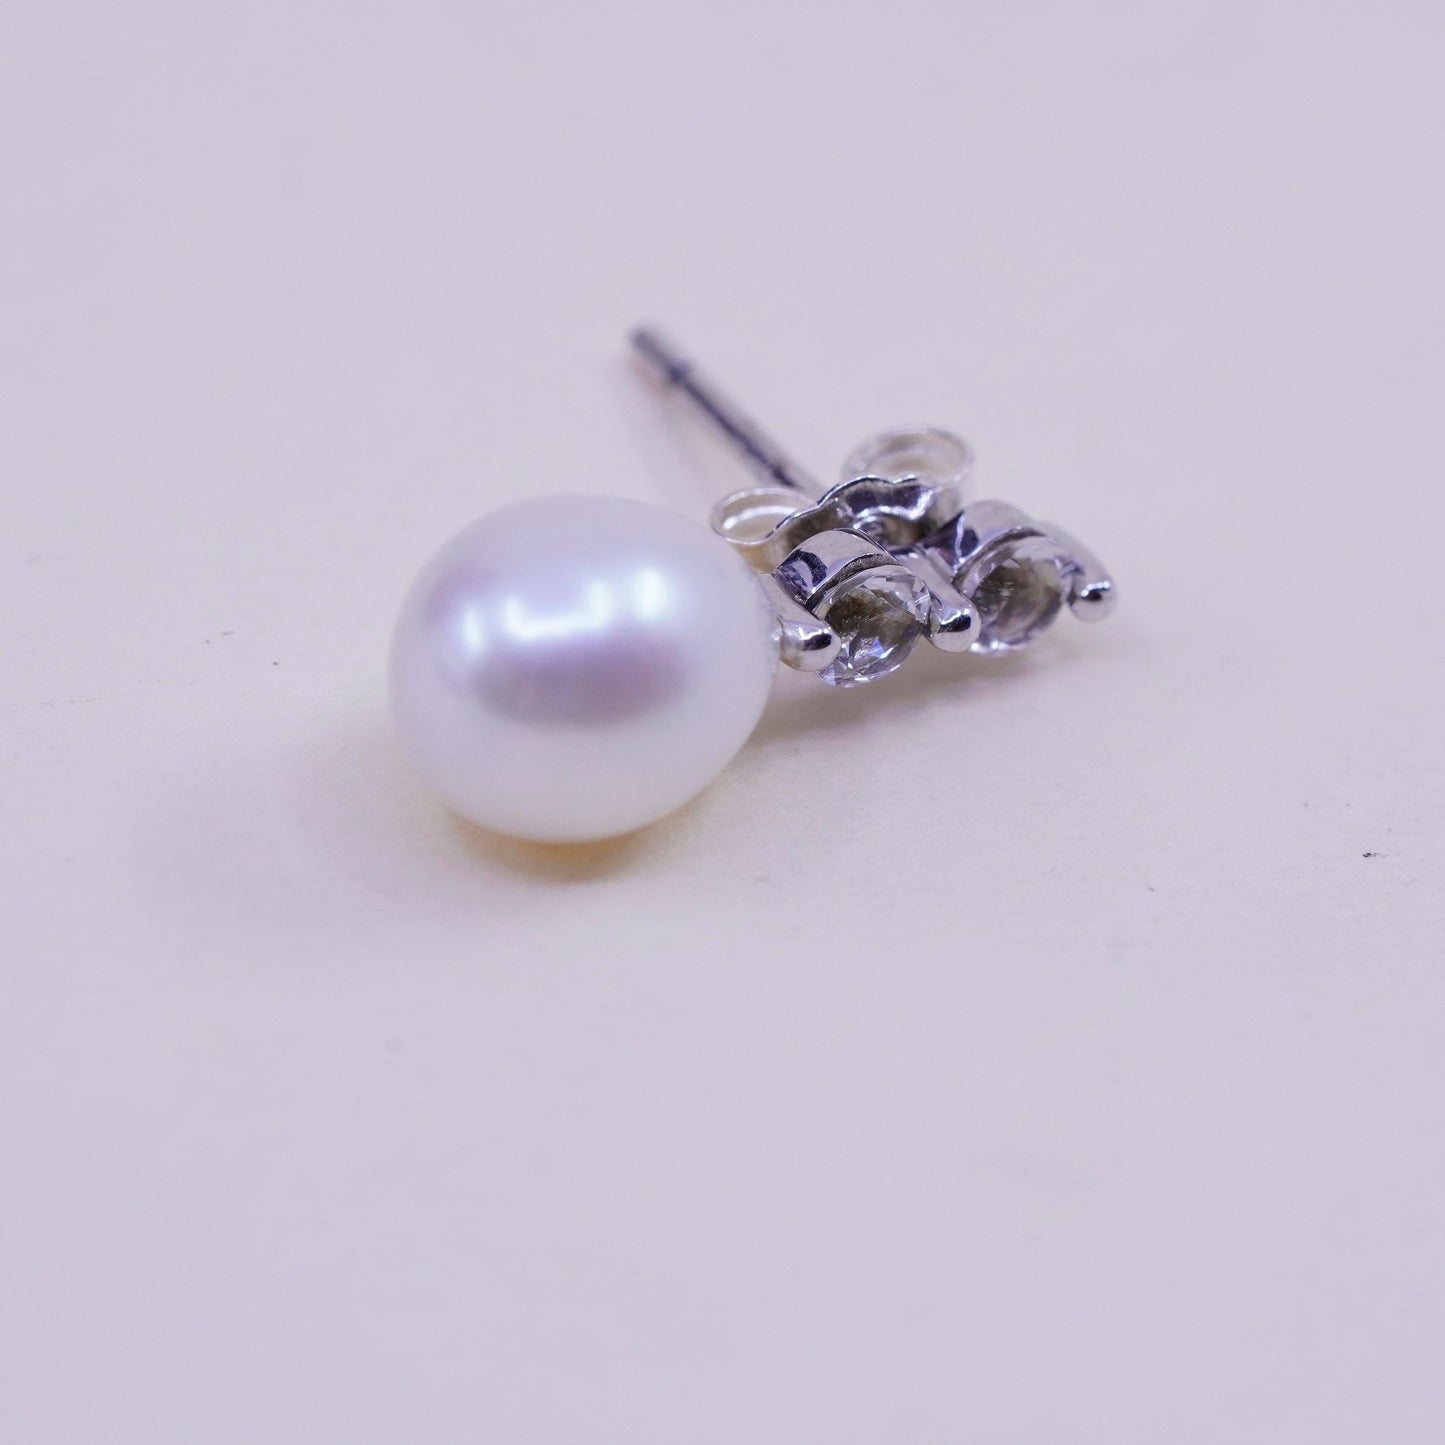 Vintage sterling silver earrings, 925 studs with pearl and cz